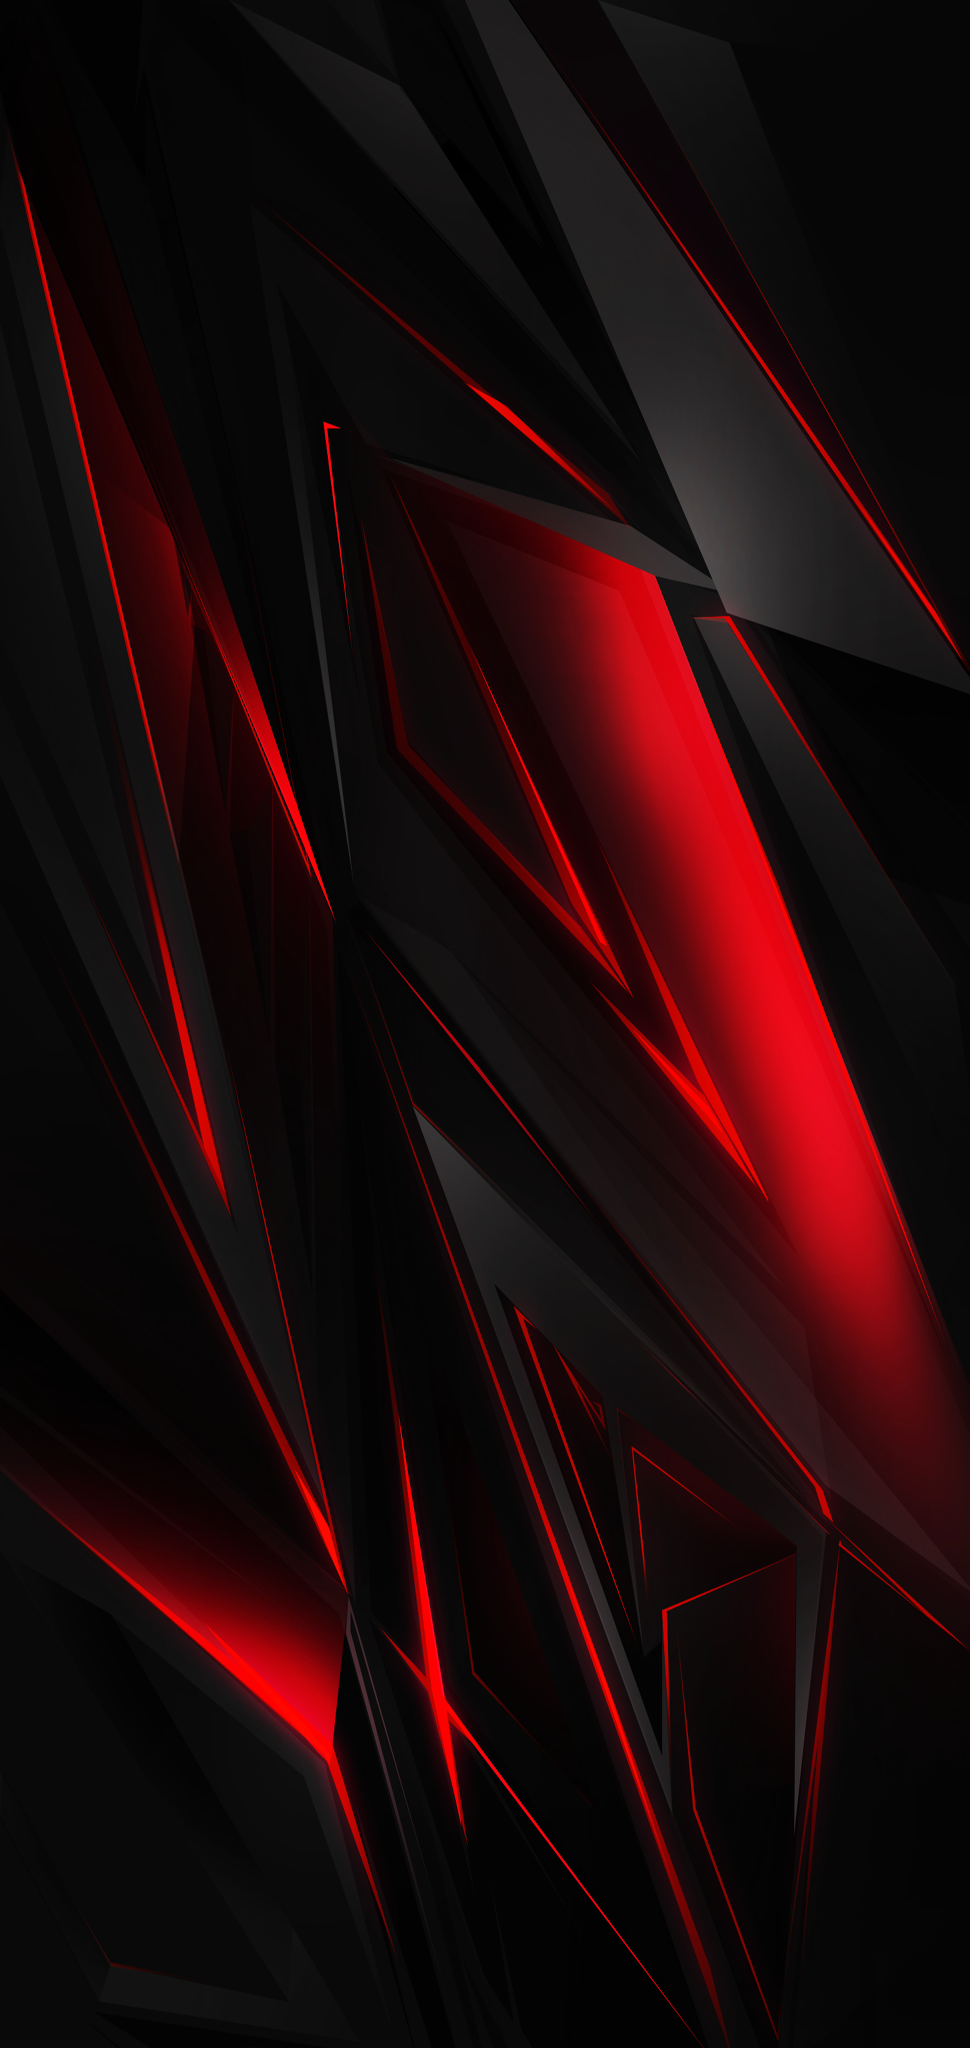 AMOLED Black and red abstract wallpaper didn't make this, but I formatted it to fit the screen of a OnePlus 6